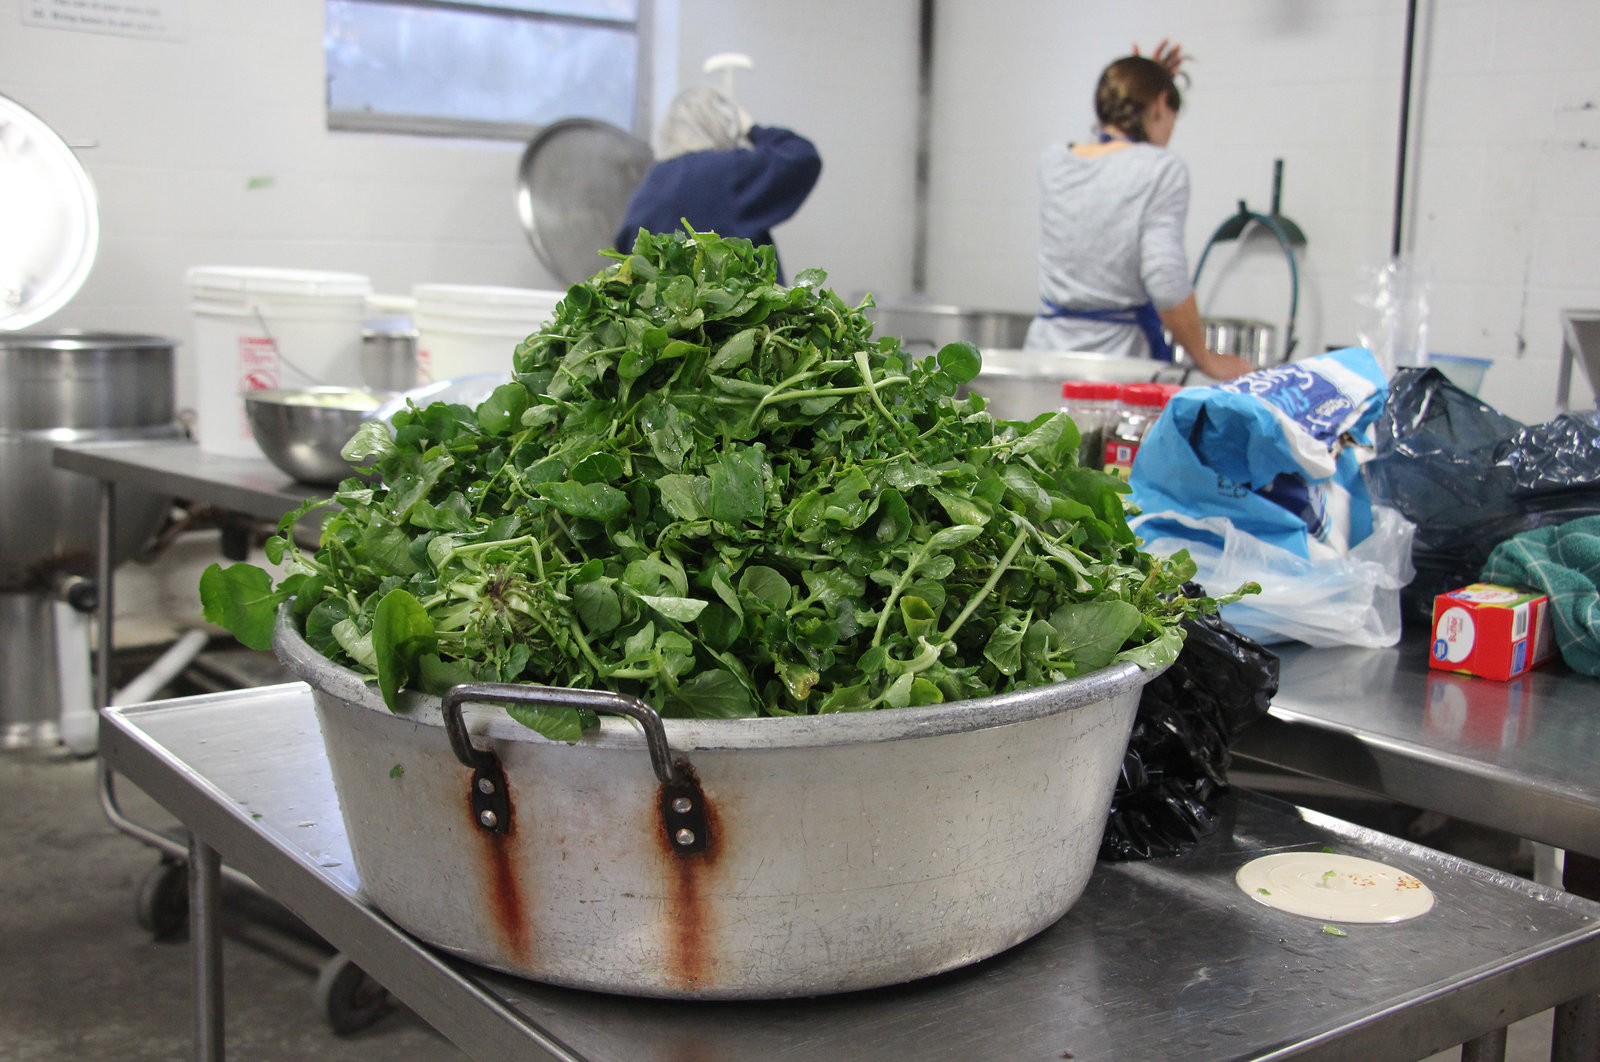 Rhonda Mayberry's creasy greens, ready to be cooked and canned.